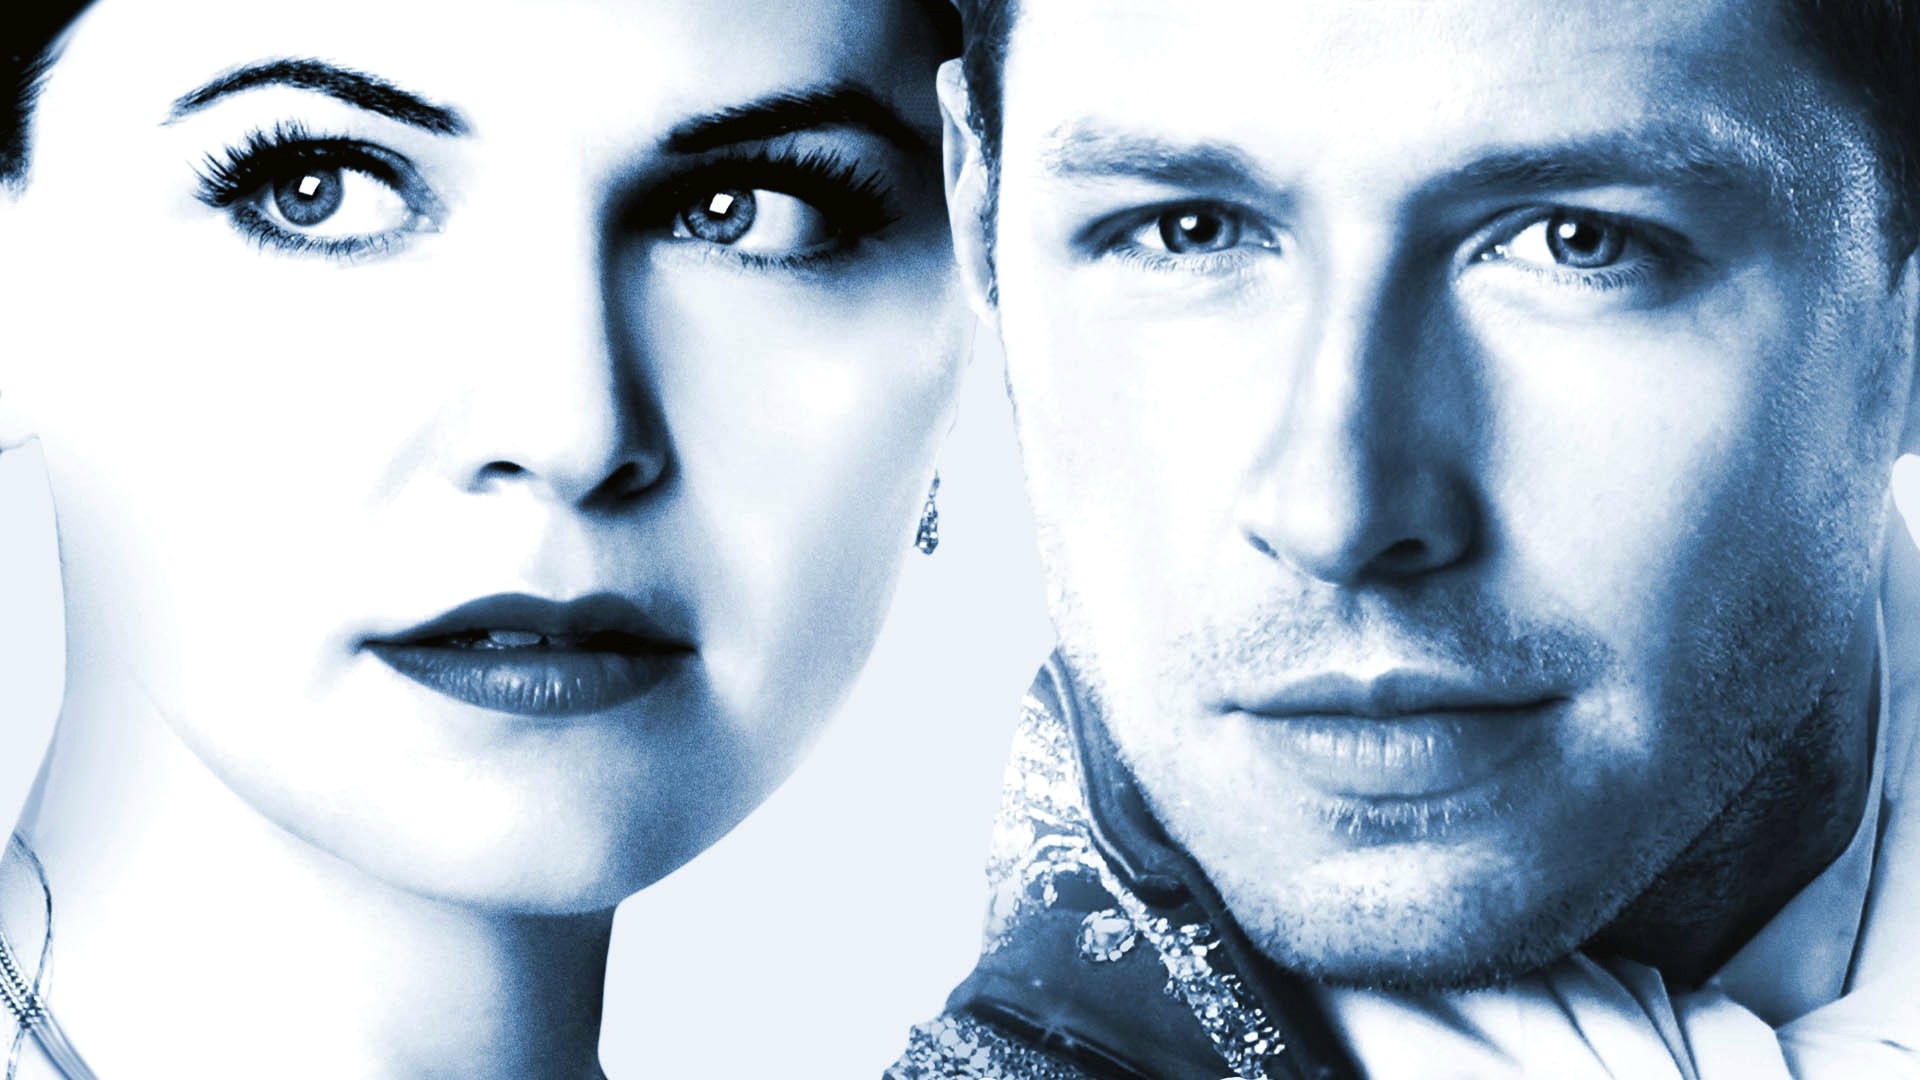 TV Show Once Upon A Time HD Wallpaper | Background Image